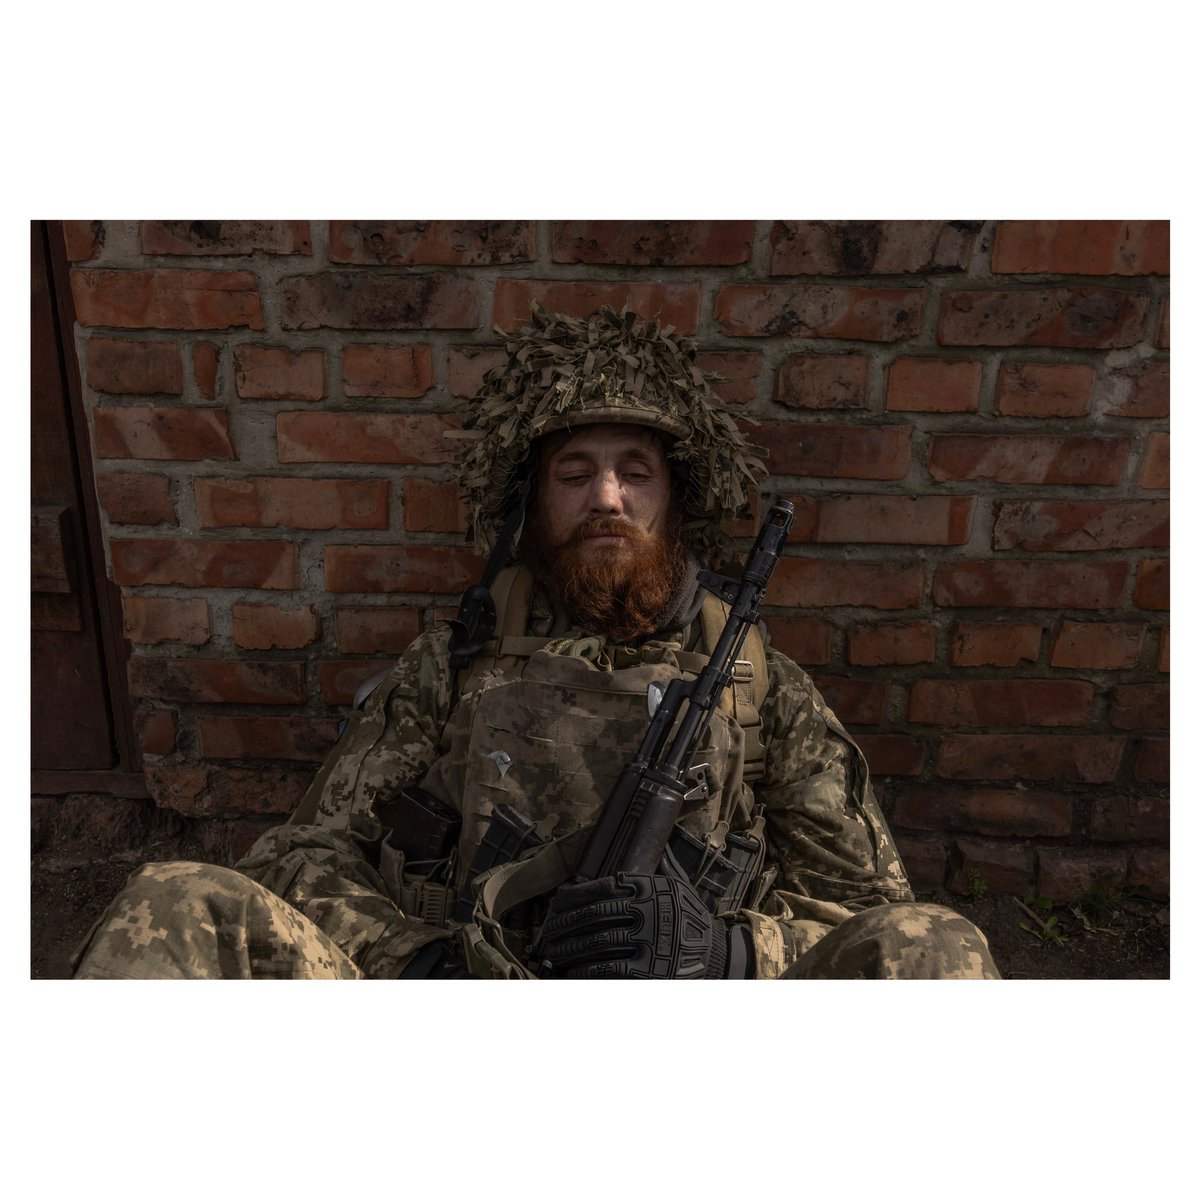 In this photograph that I took in early April 2024 is Serhii, an infantryman at the moment he was waiting to go to the frontline Shortly afterwards, the photo was published on the front page of Liberation, but Serhii would never see it. He was killed in action later that month.